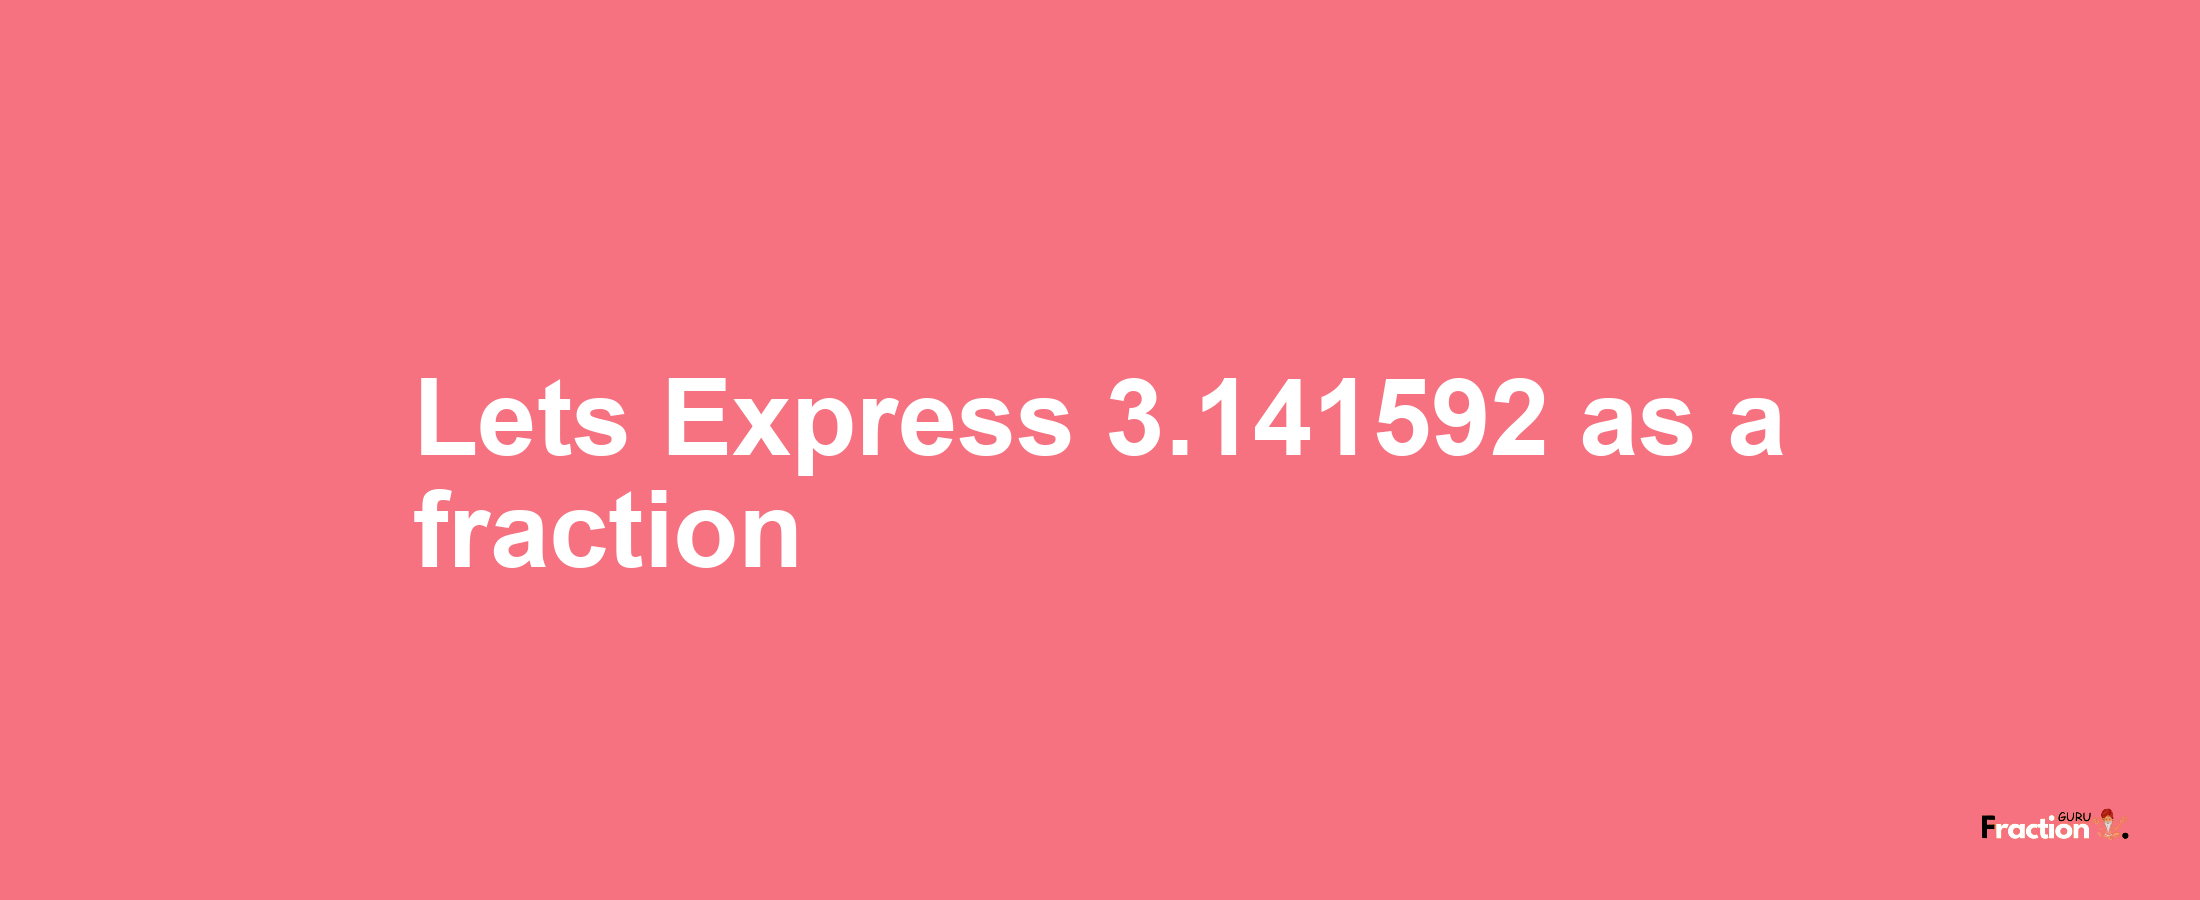 Lets Express 3.141592 as afraction